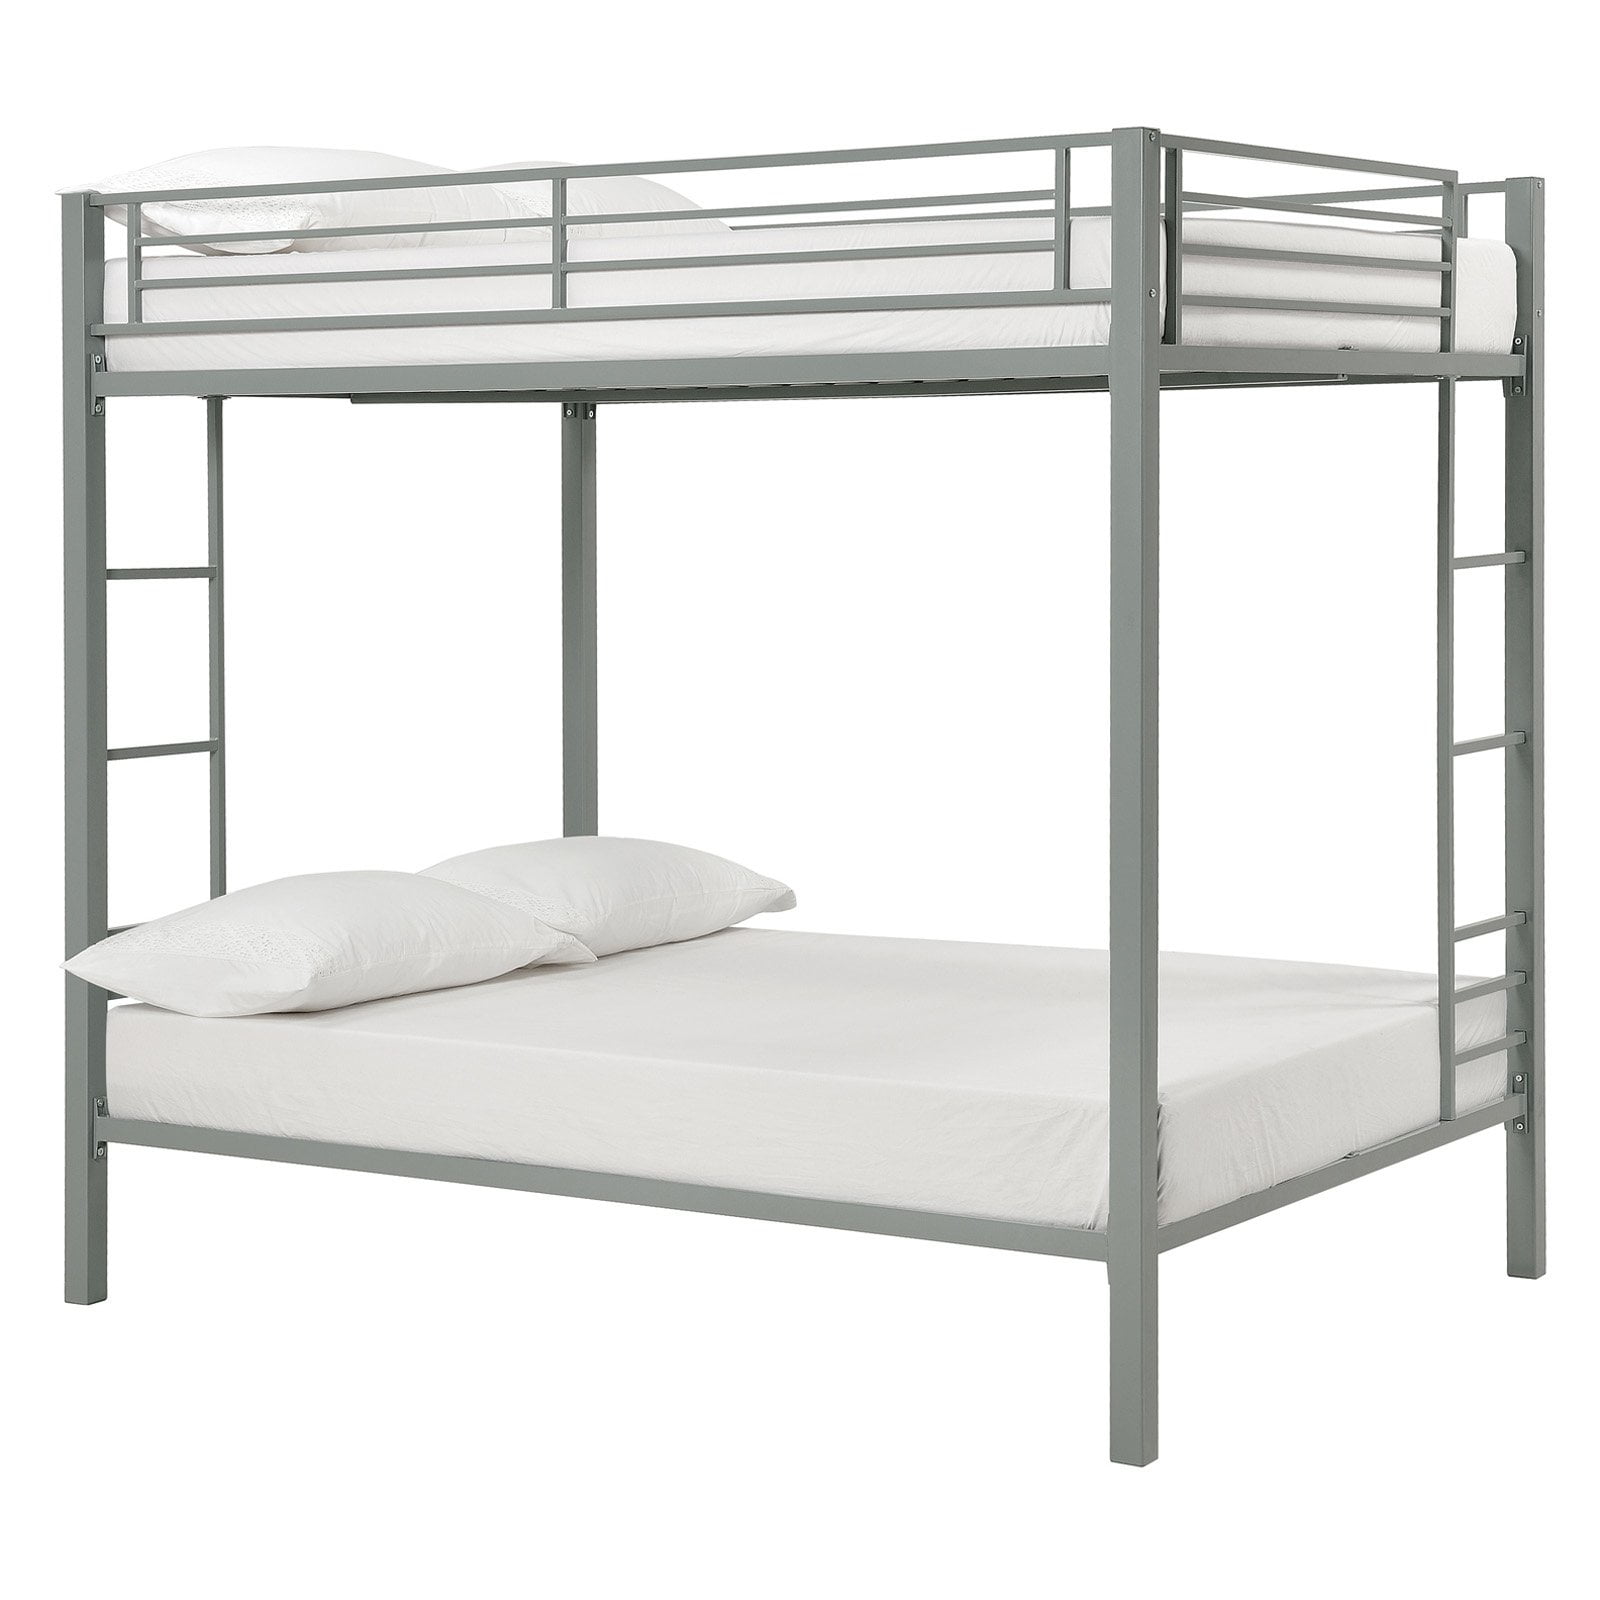 Dhp Full Over Bunk Bed For Kids, Twin Over Full Metal Bunk Bed Assembly Instructions